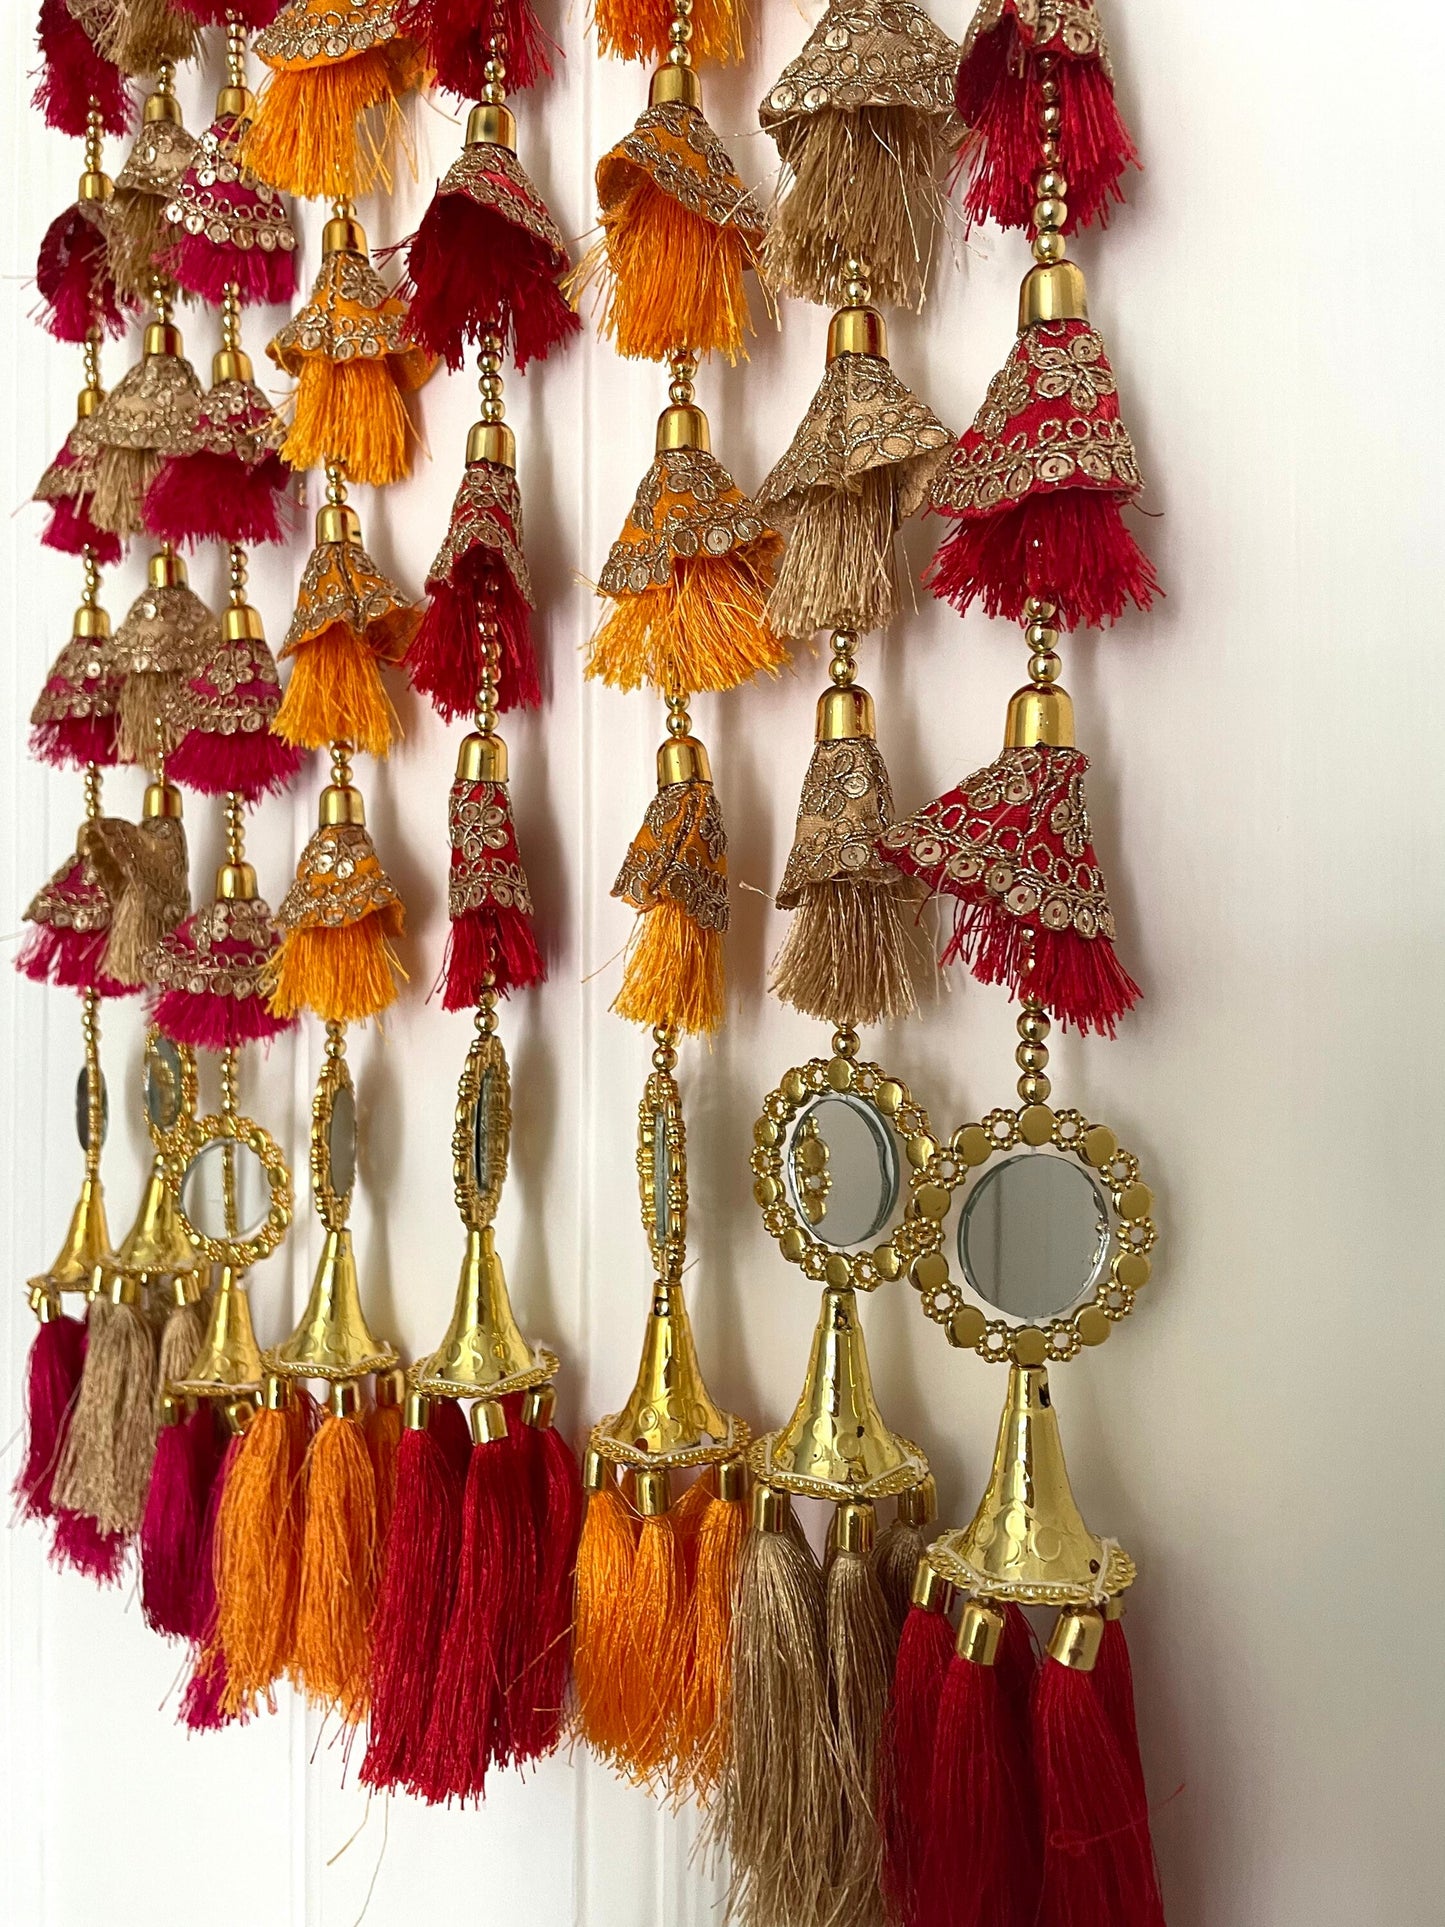 Pack of 5 Hanging Strings Latkans with Mirror Tassel for Diwali Decoration Pooja Backdrops Event Weddings Home Decor New Home